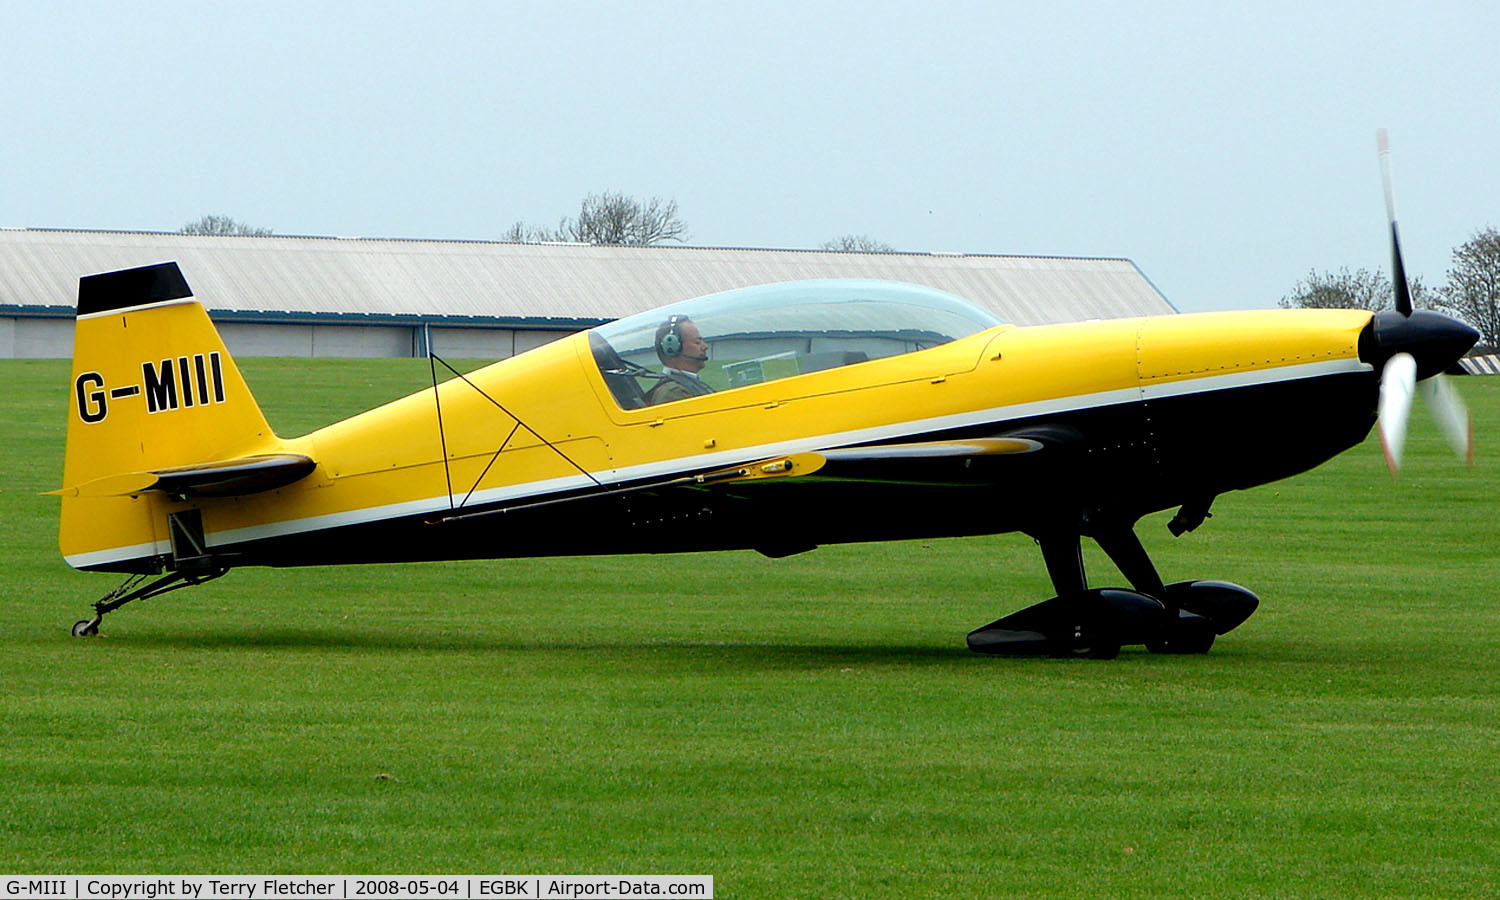 G-MIII, 1995 Extra EA-300L C/N 013, part of the Sywell GA scene on Tiger Moth Fly-in Day in May 2008